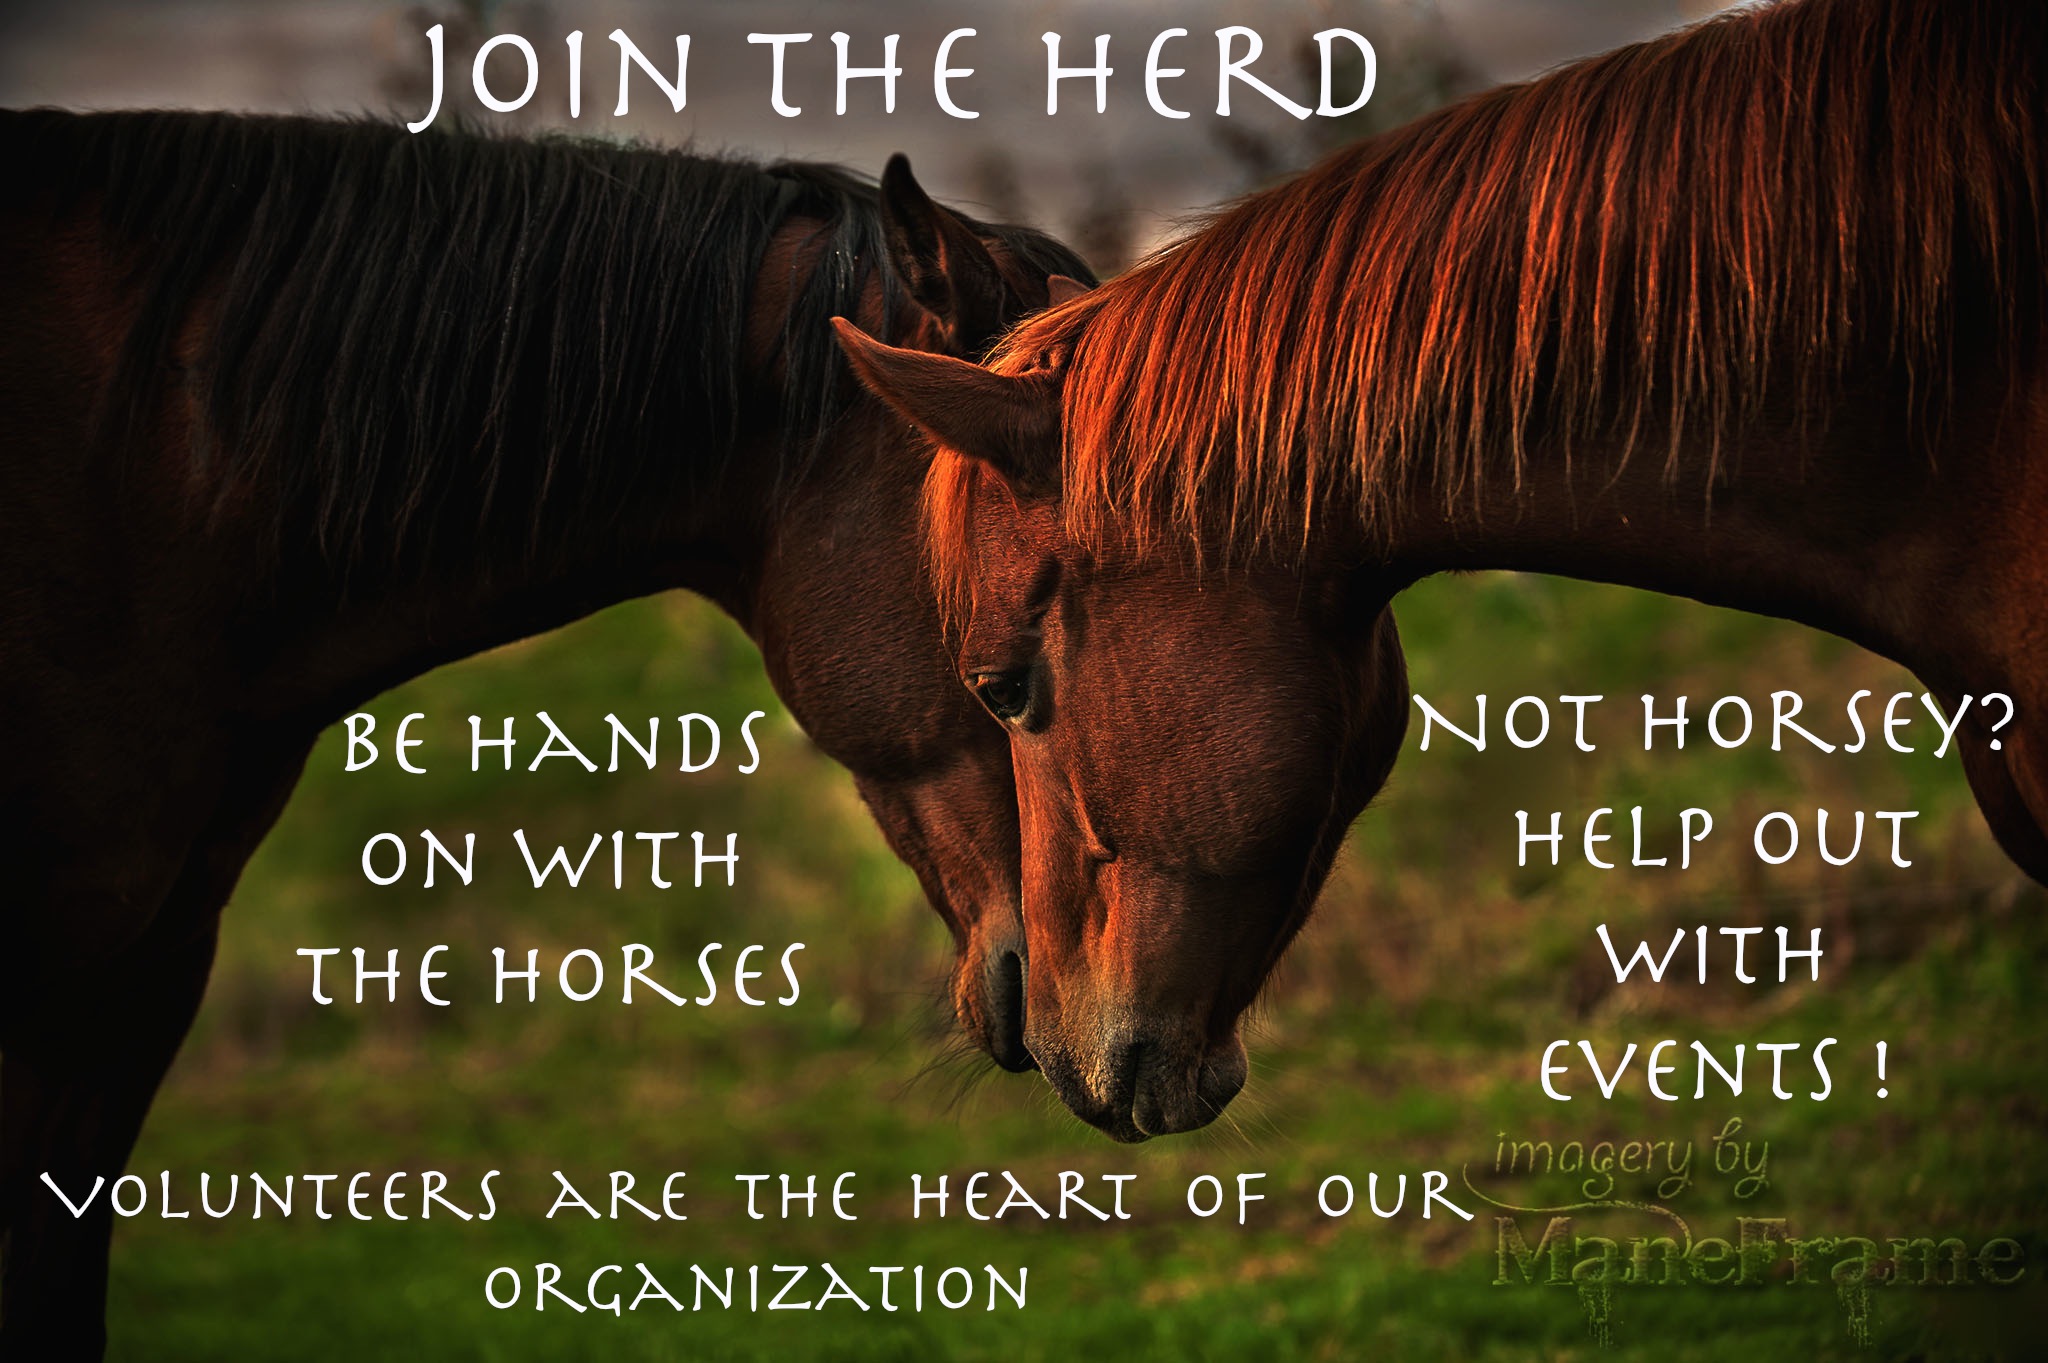 Join the herd